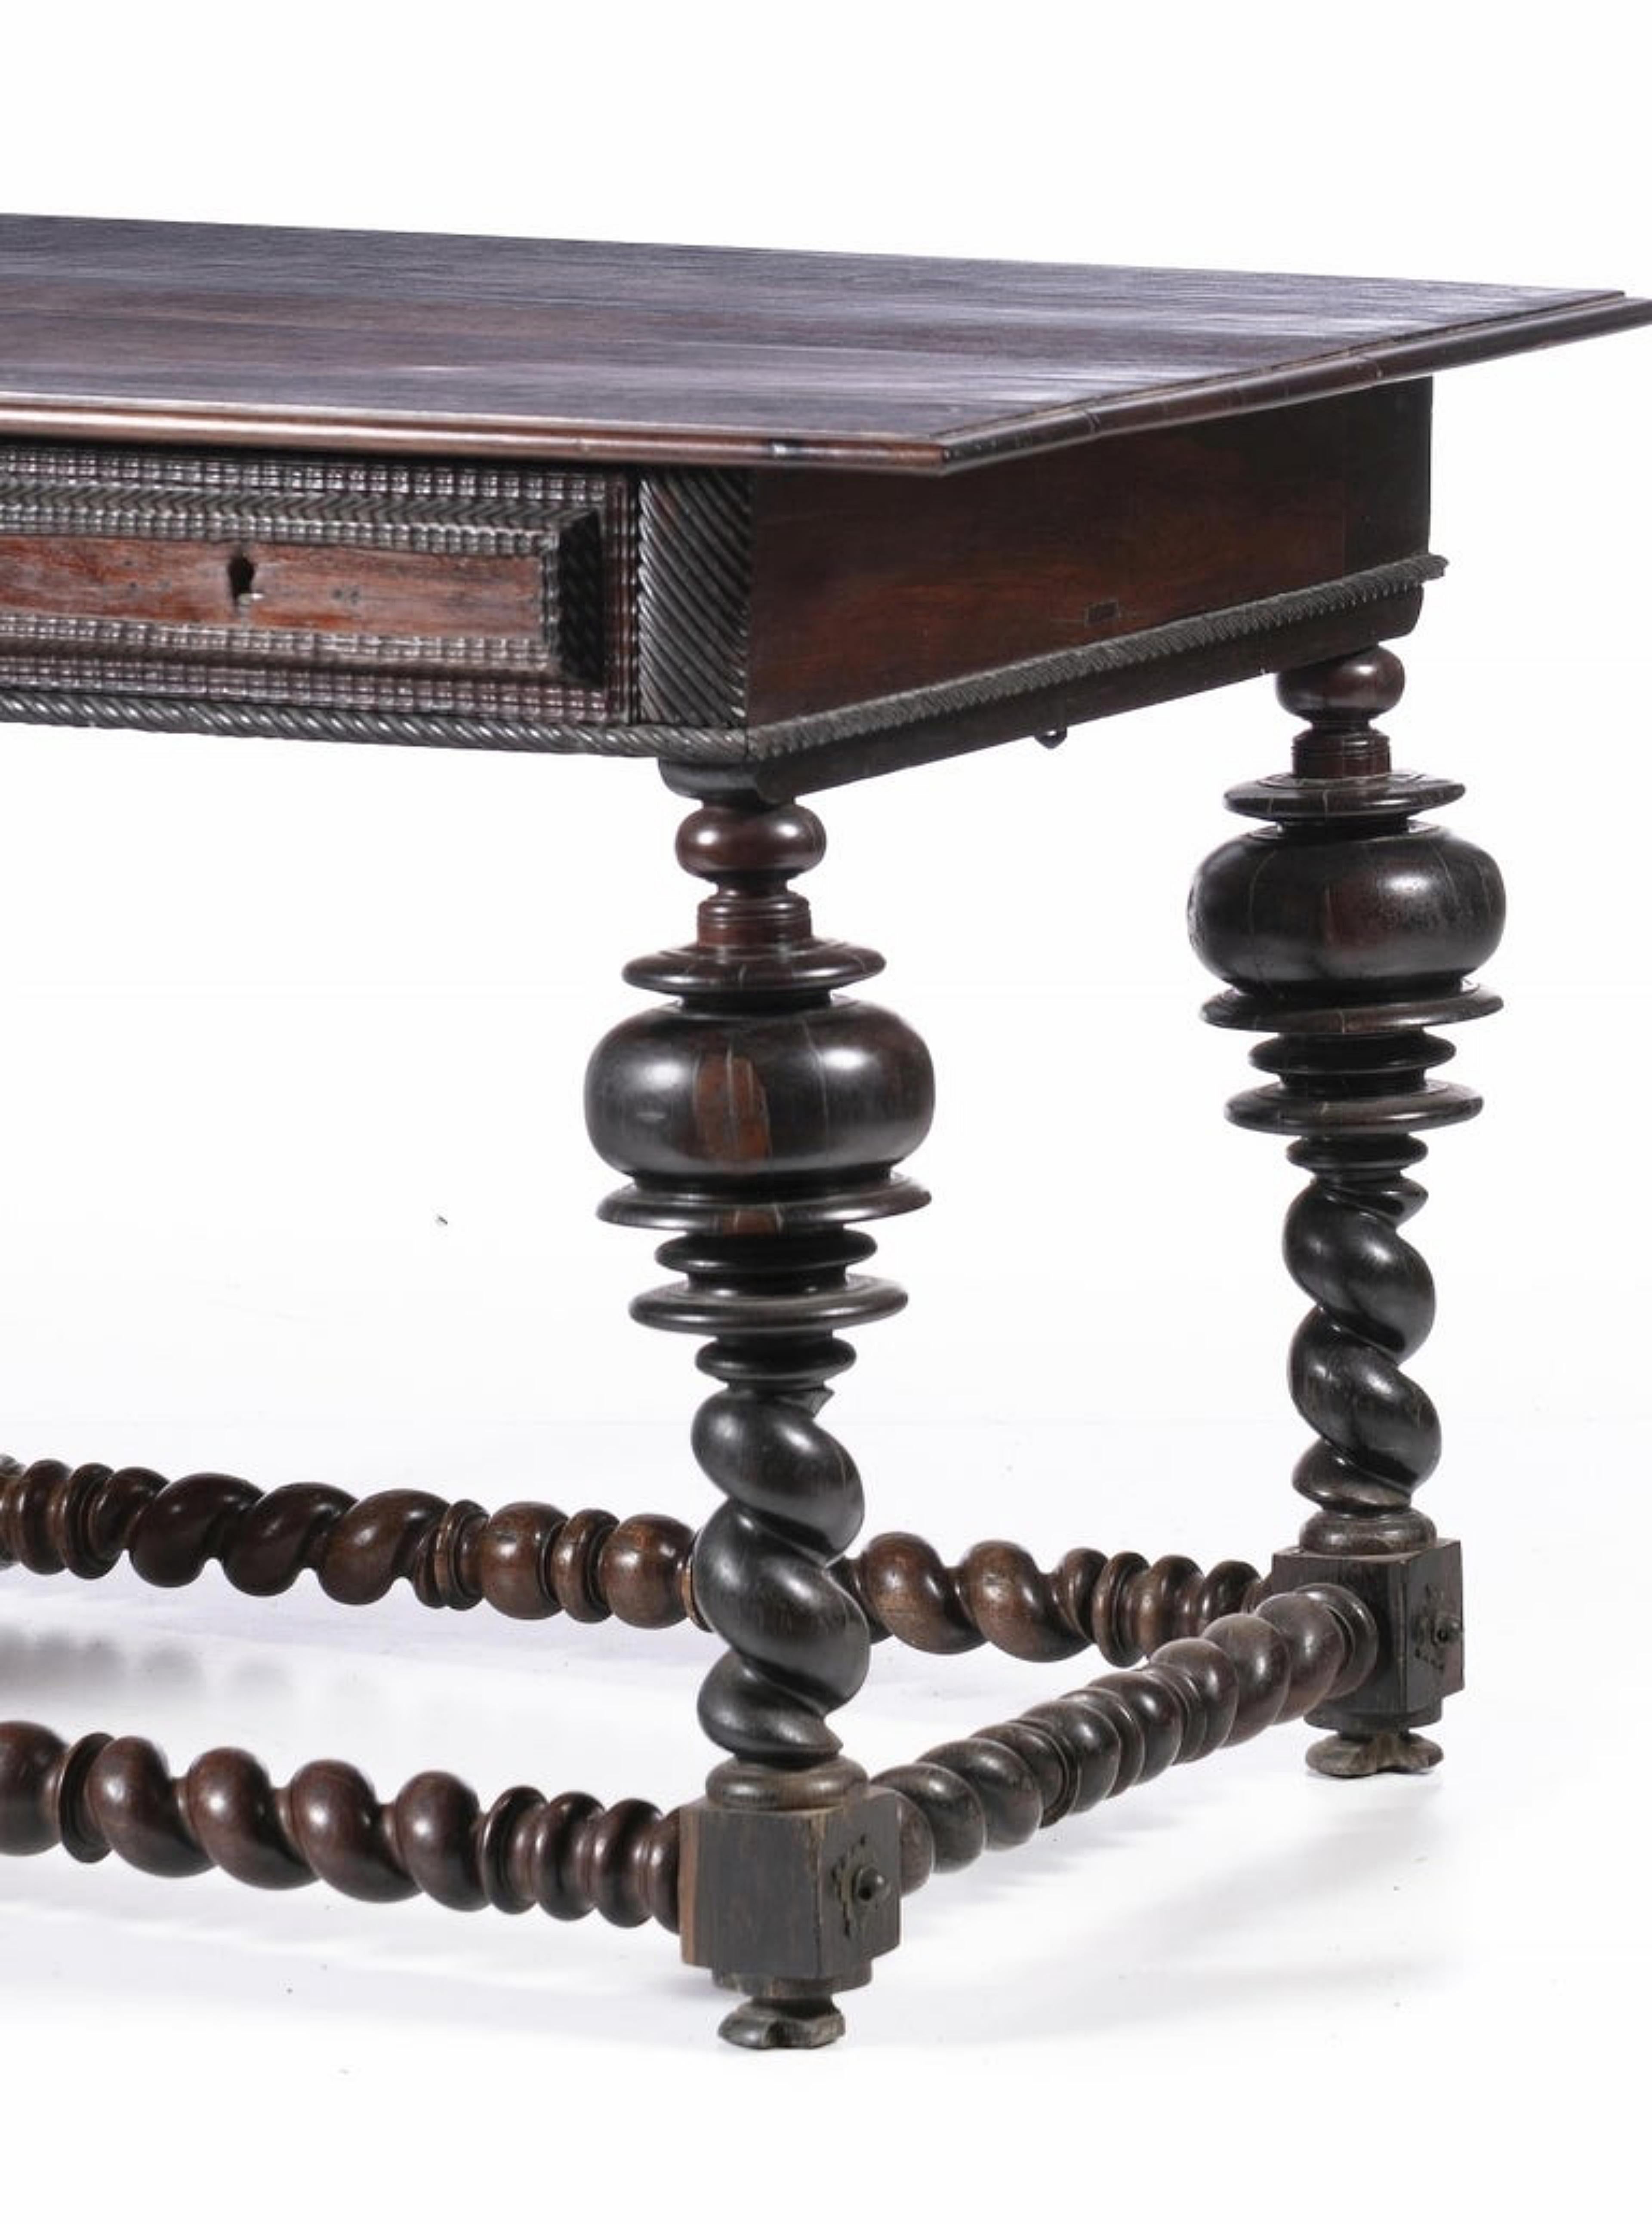 Baroque Portuguese Buffet Table 17th Century For Sale